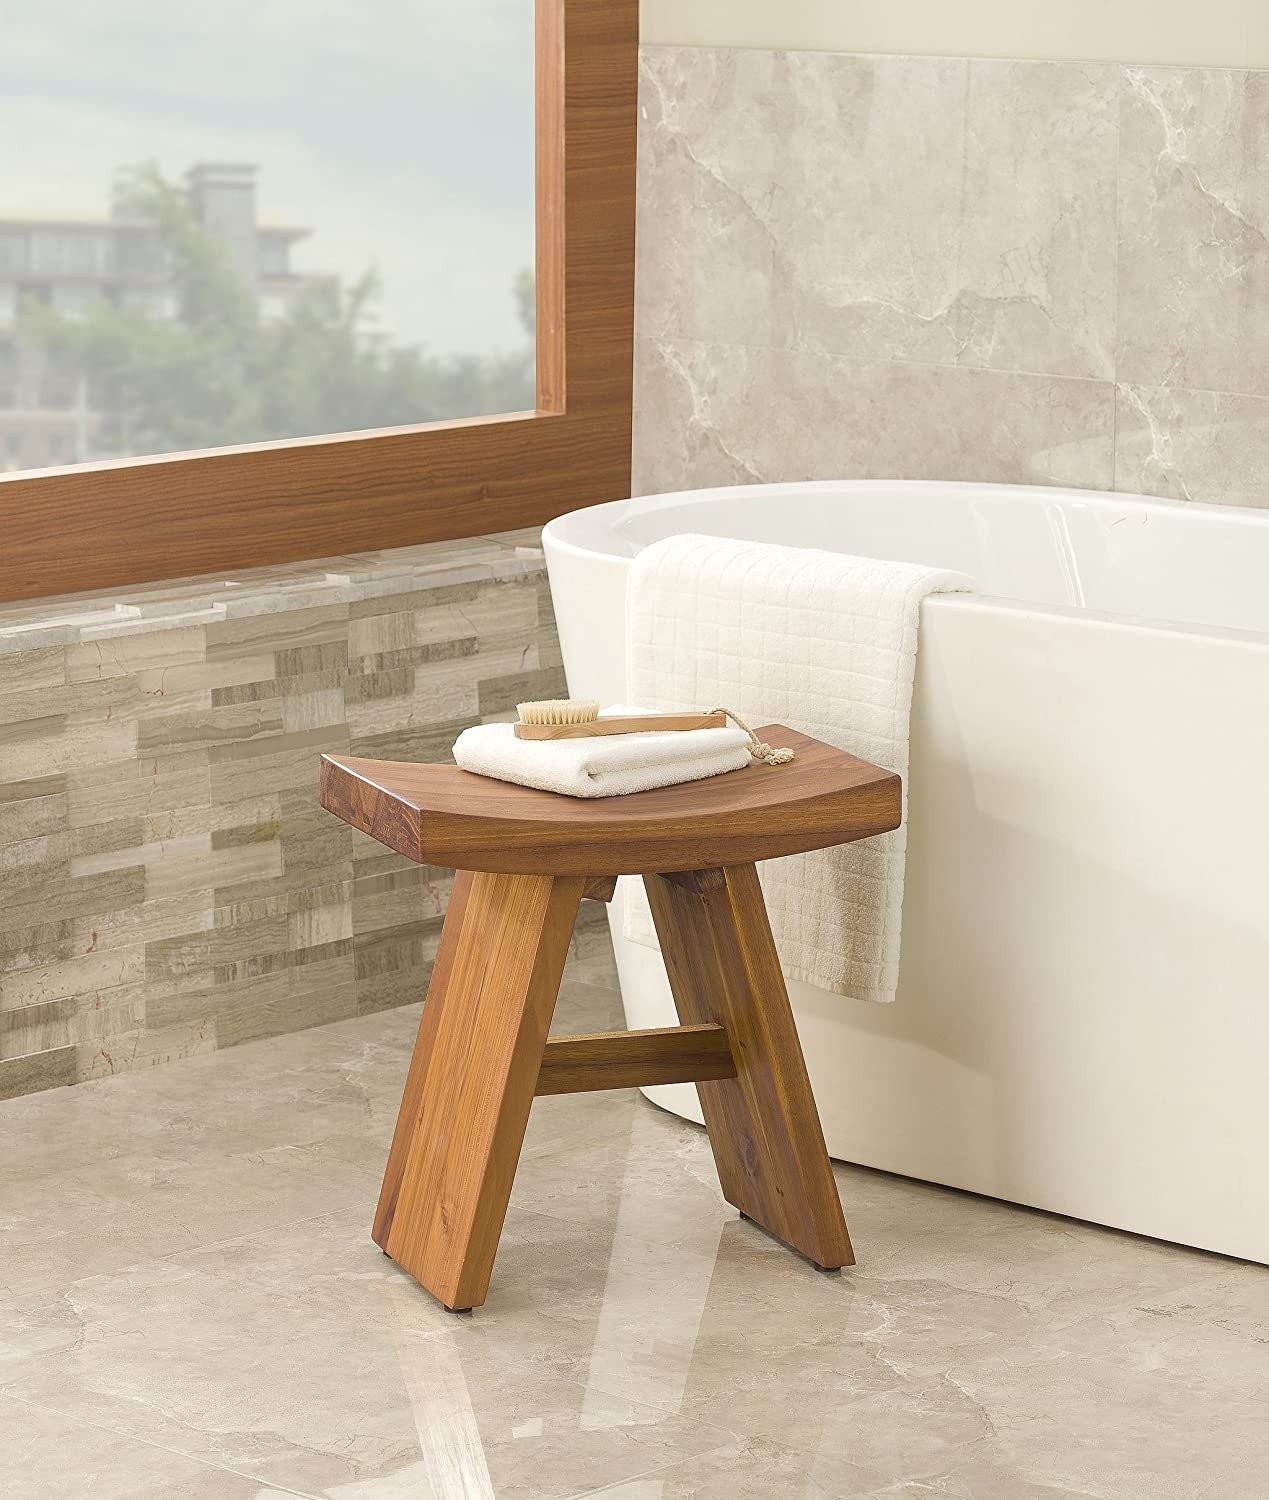 Experience Luxury and Comfort with a Stand-Up Shower Bench